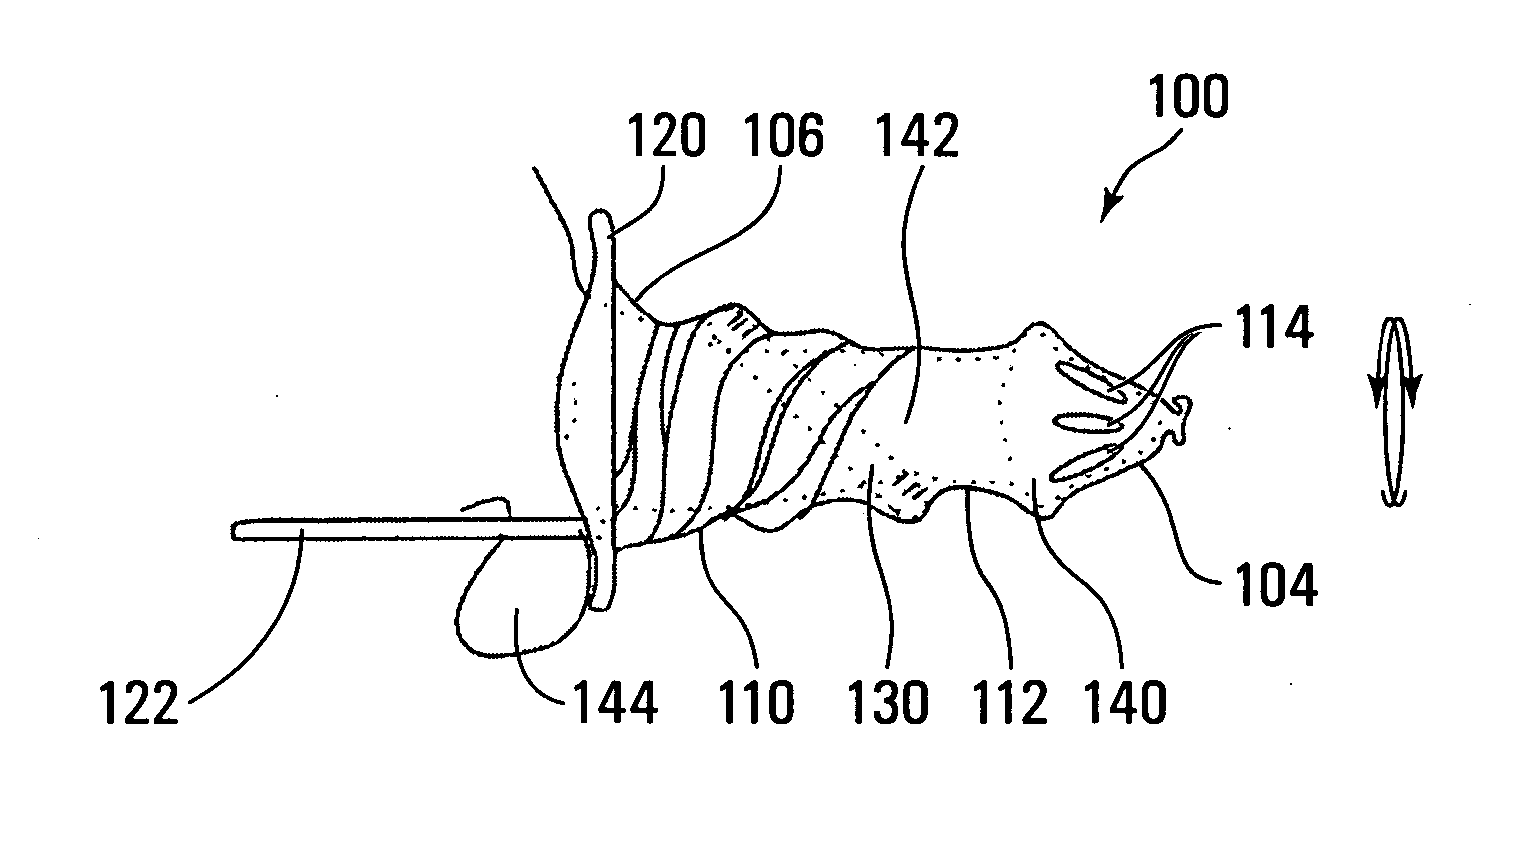 External penile prosthesis, combination of prosthesis and loose-fitting condom, and method of using condom